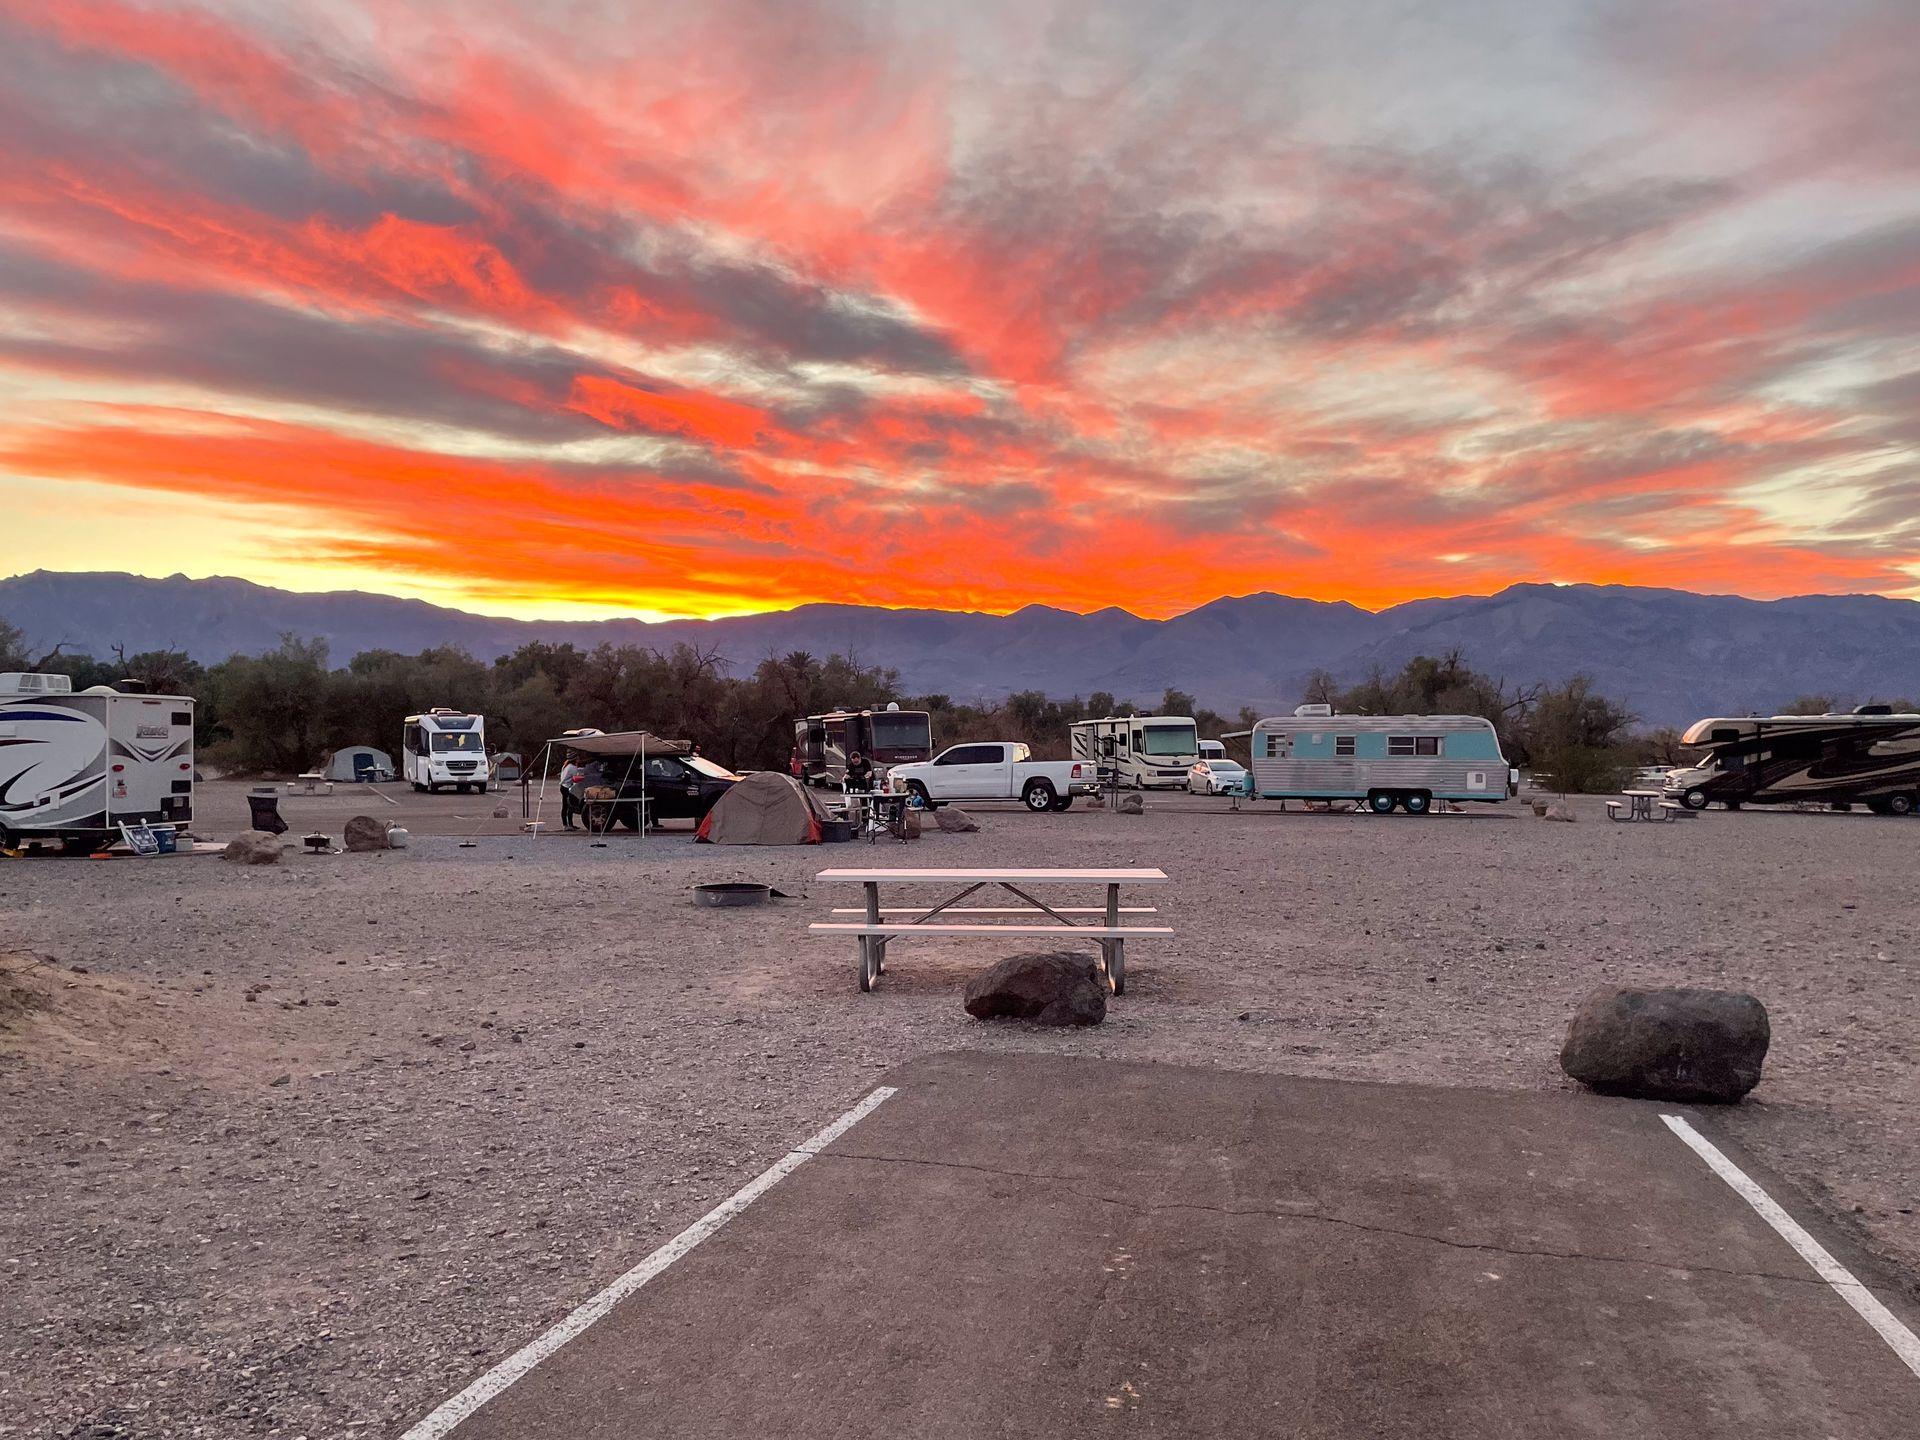 A vibrant sunset seem from the Furnace Creek Campground in Death Valley